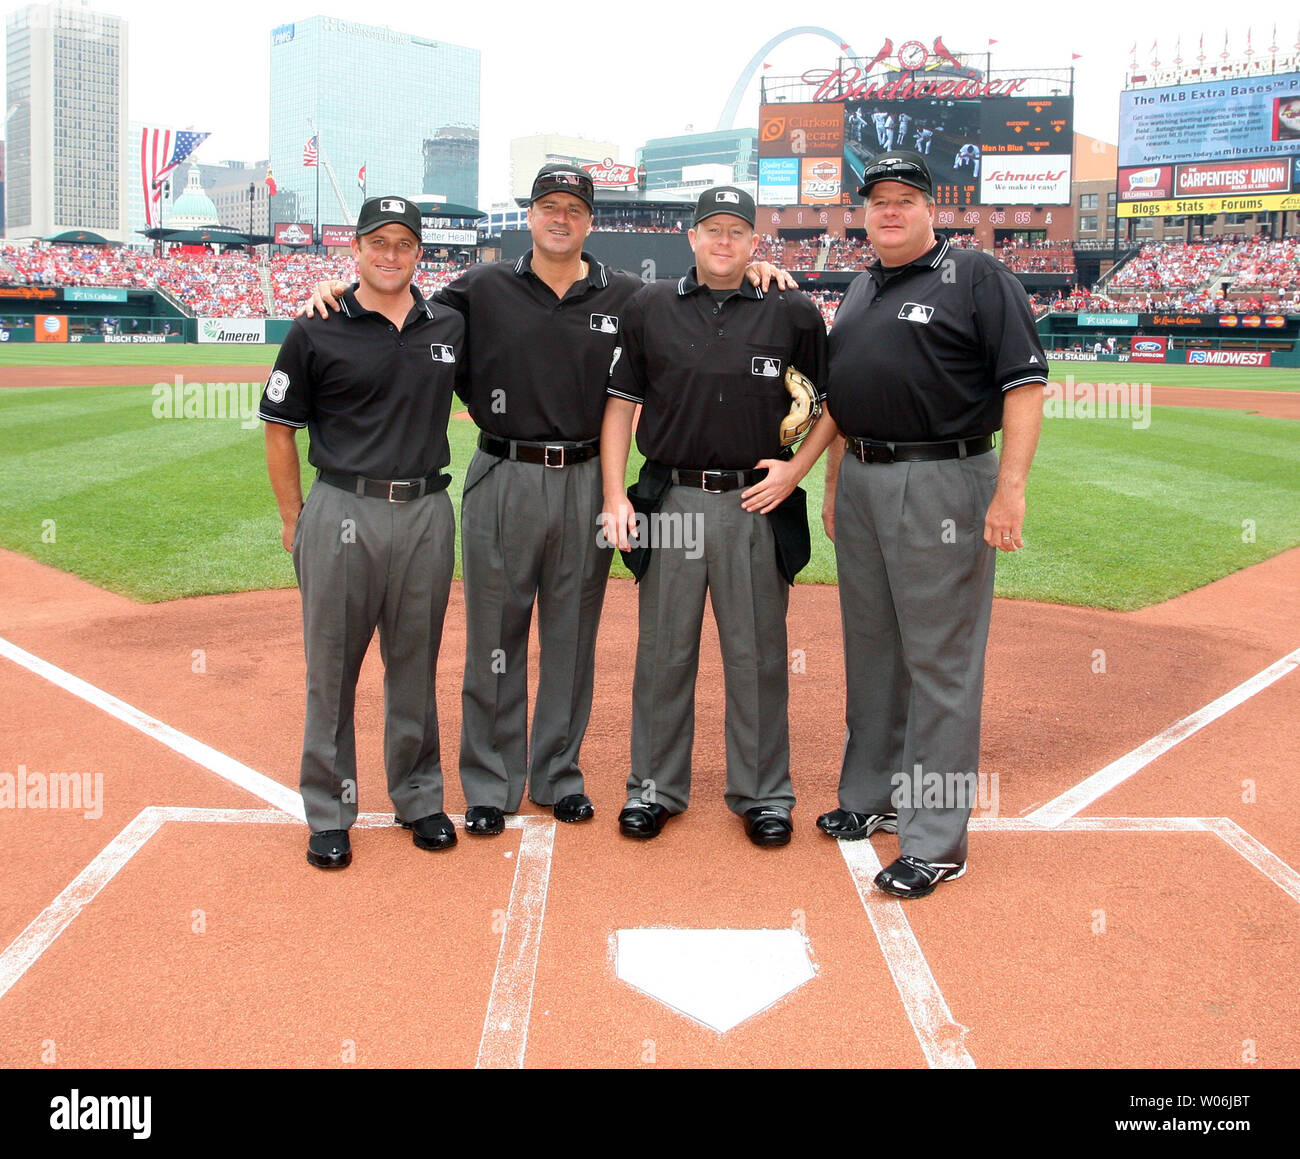 Umpires (L to R) Chris Guccione, Tony Randazzo, Todd Tichenor and Jerry Layne pose for a photograph before the  Kansas City Royals- St. Louis Cardinals baseball game at Busch Stadium in St. Louis on May 24, 2009.  (UPI Photo/Bill Greenblatt) Stock Photo